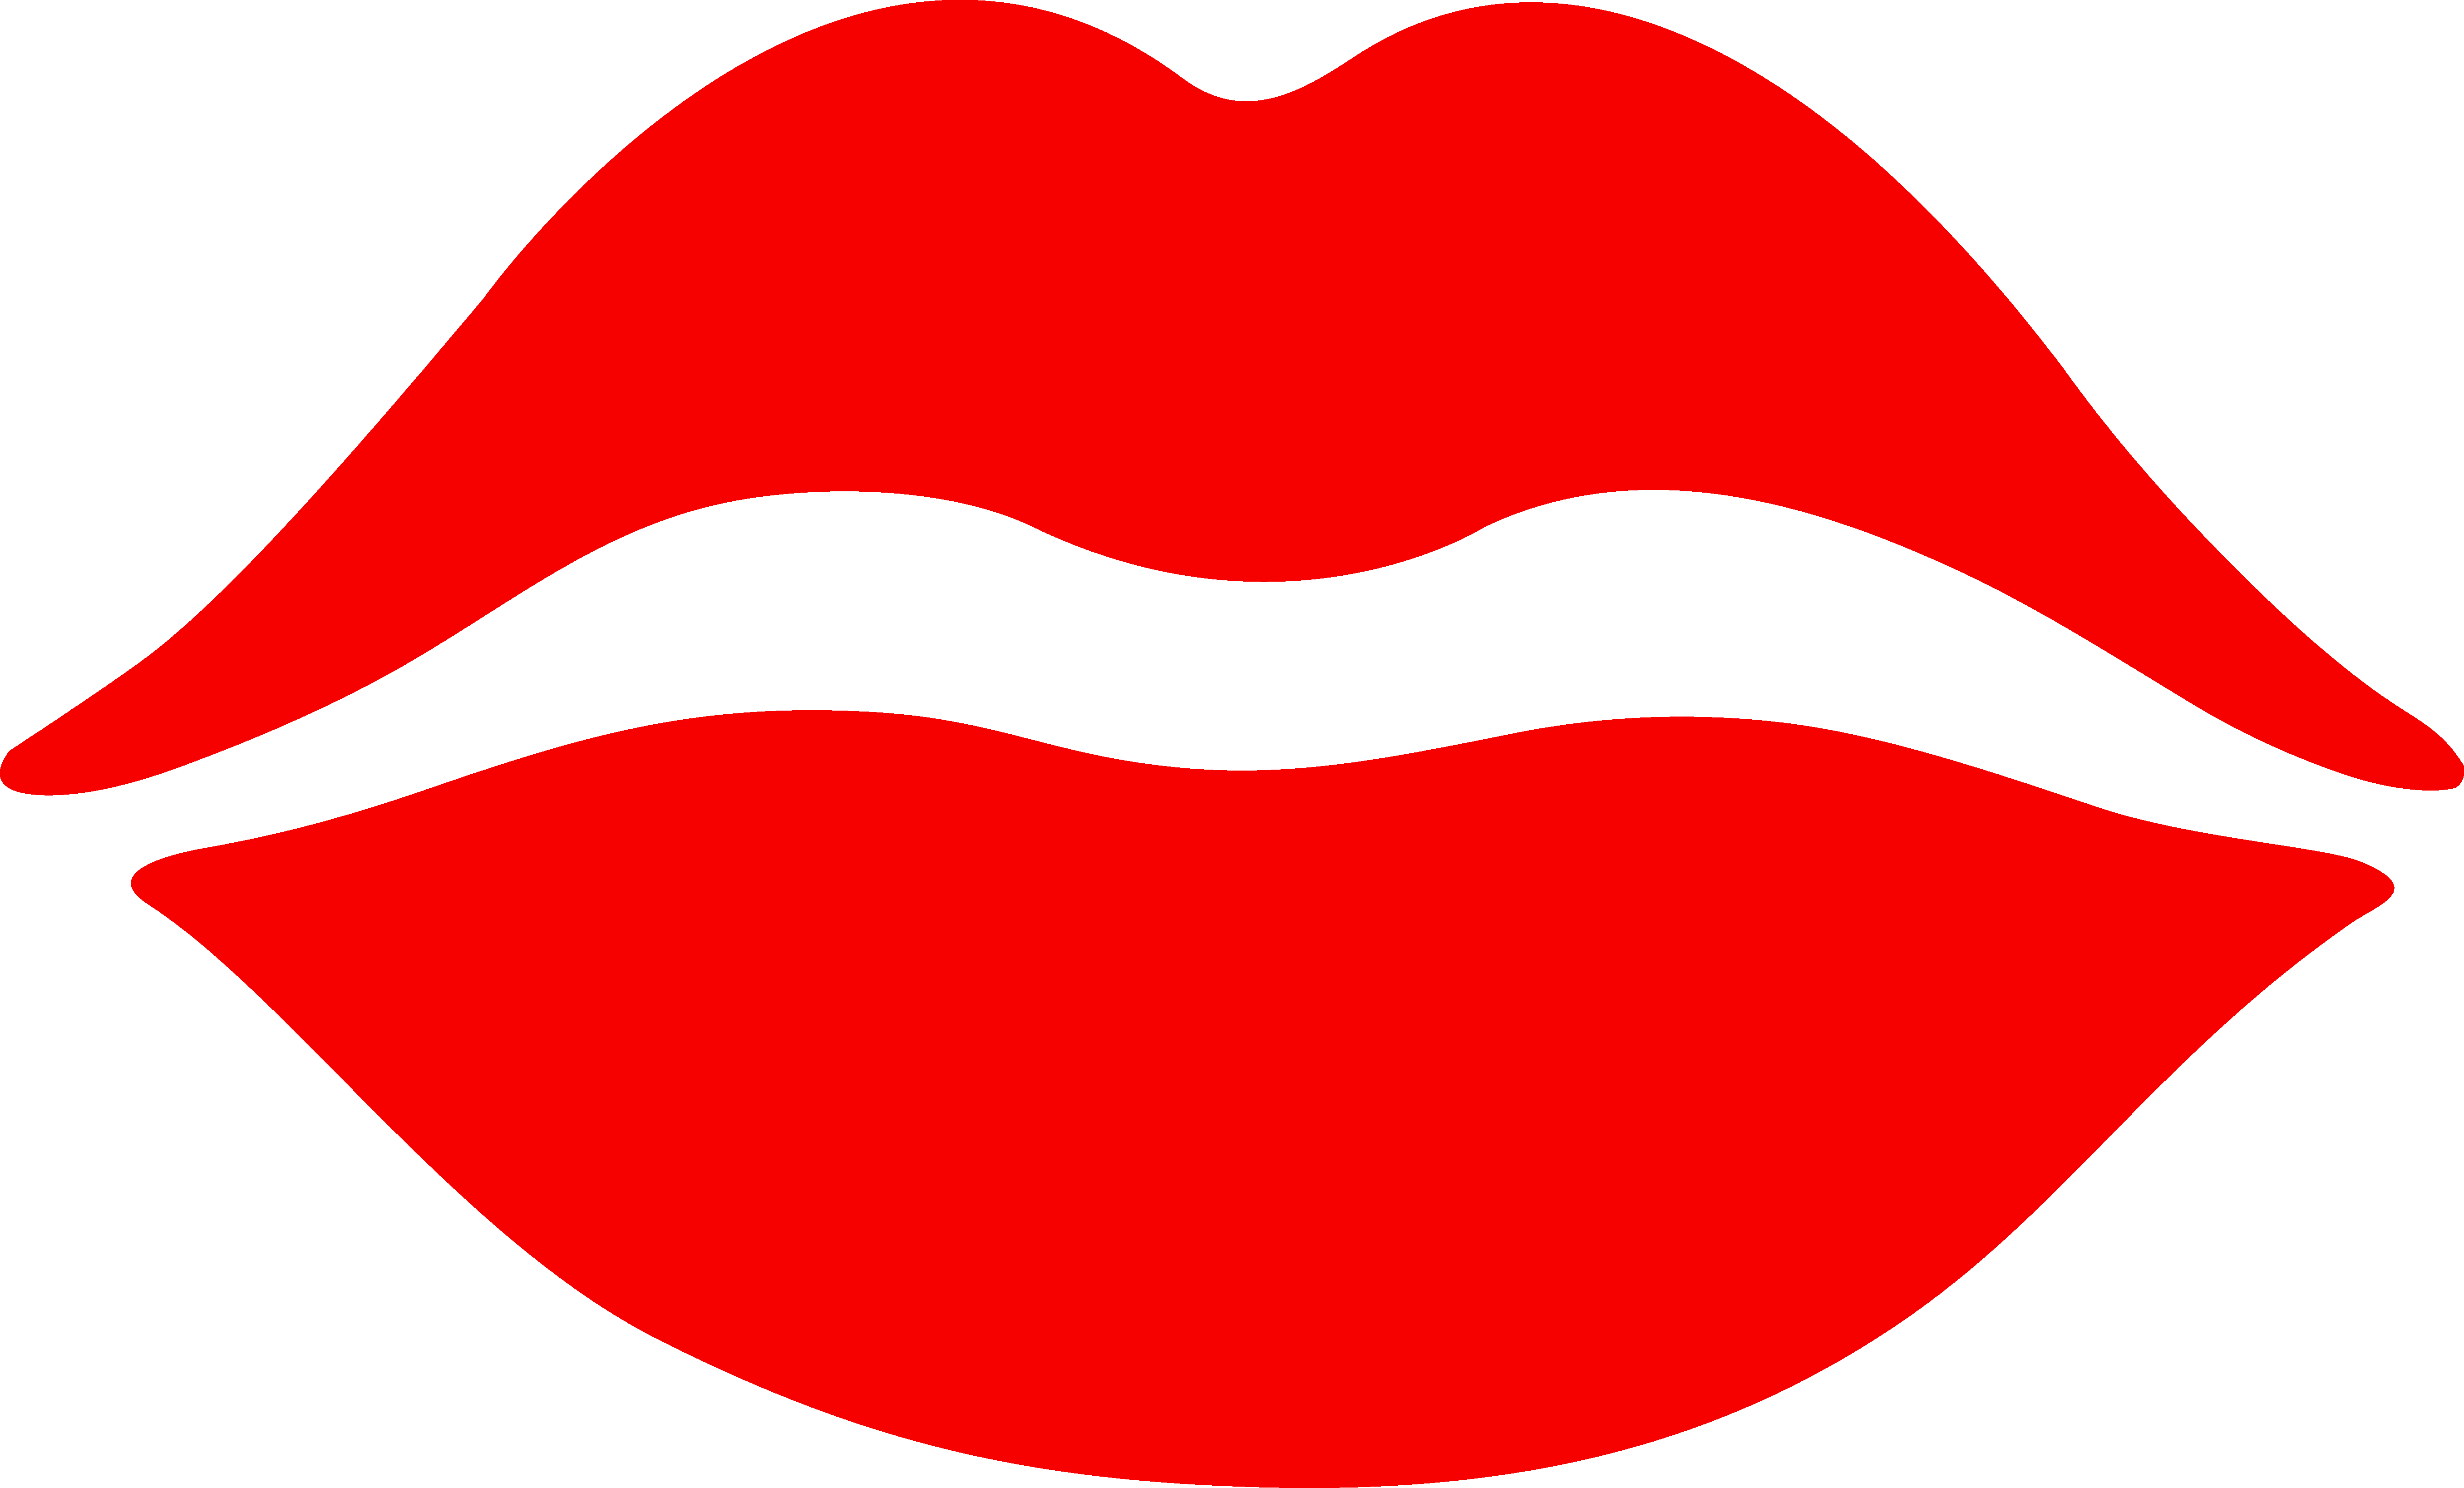 Animated Red Lips - ClipArt Best